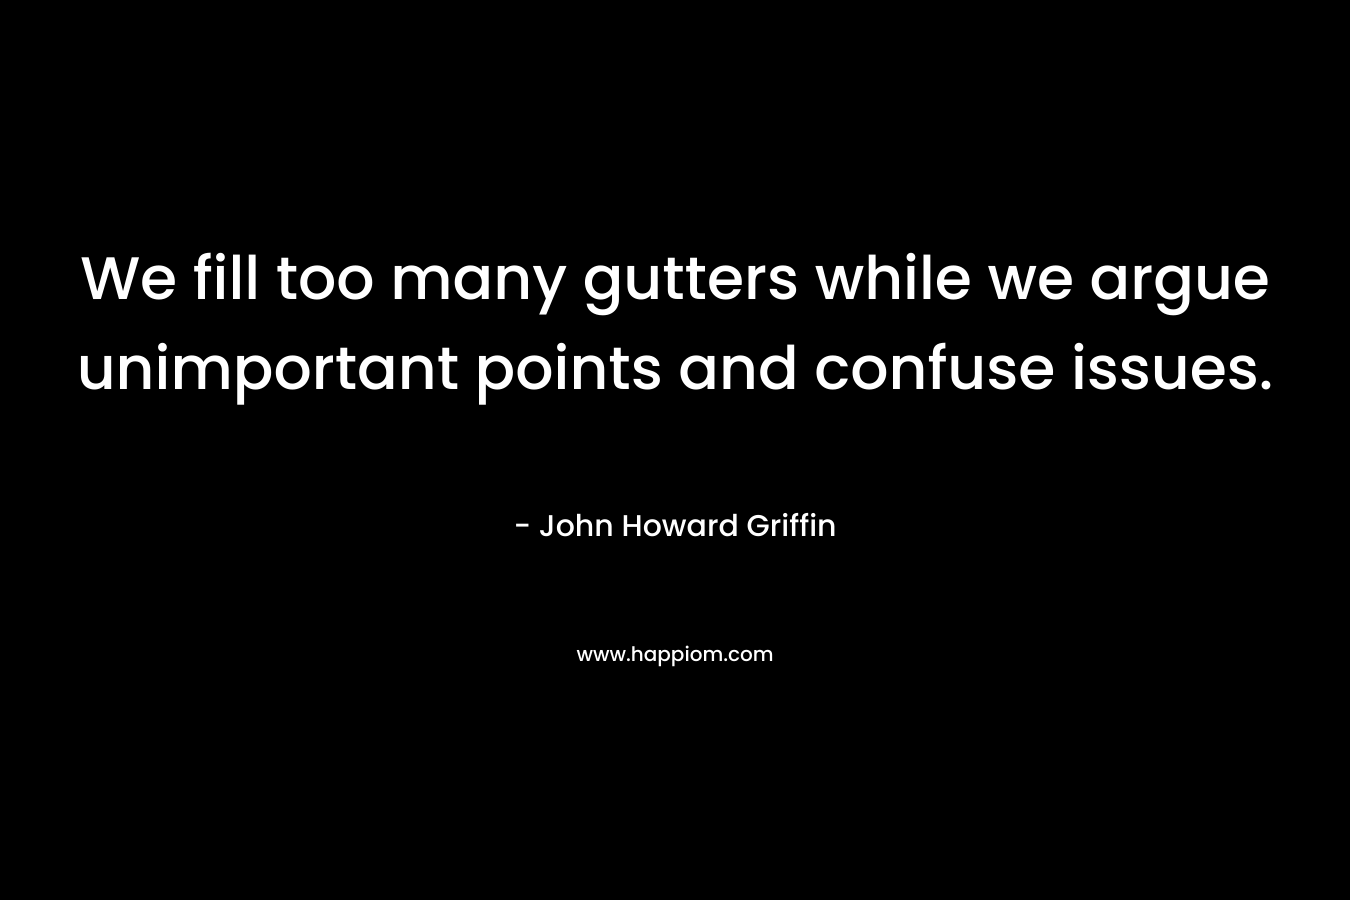 We fill too many gutters while we argue unimportant points and confuse issues. – John Howard Griffin